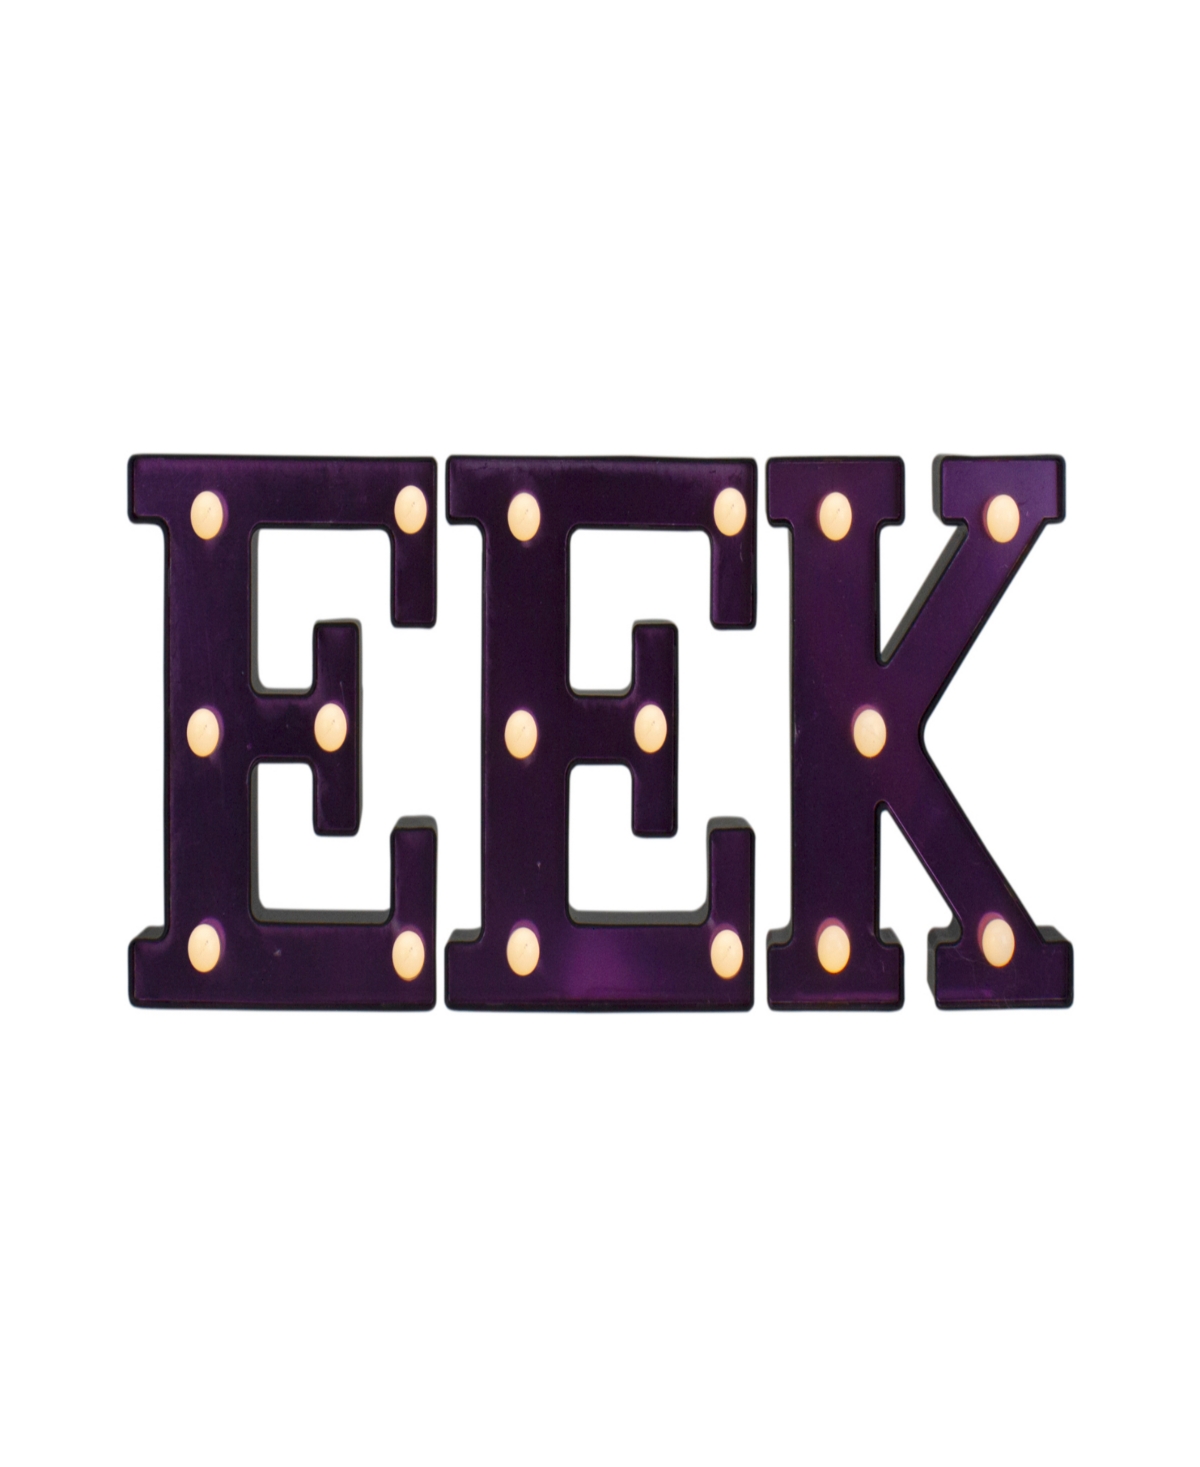 Northlight 6.5" Led Lighted 'eek' Halloween Marquee Sign In Black